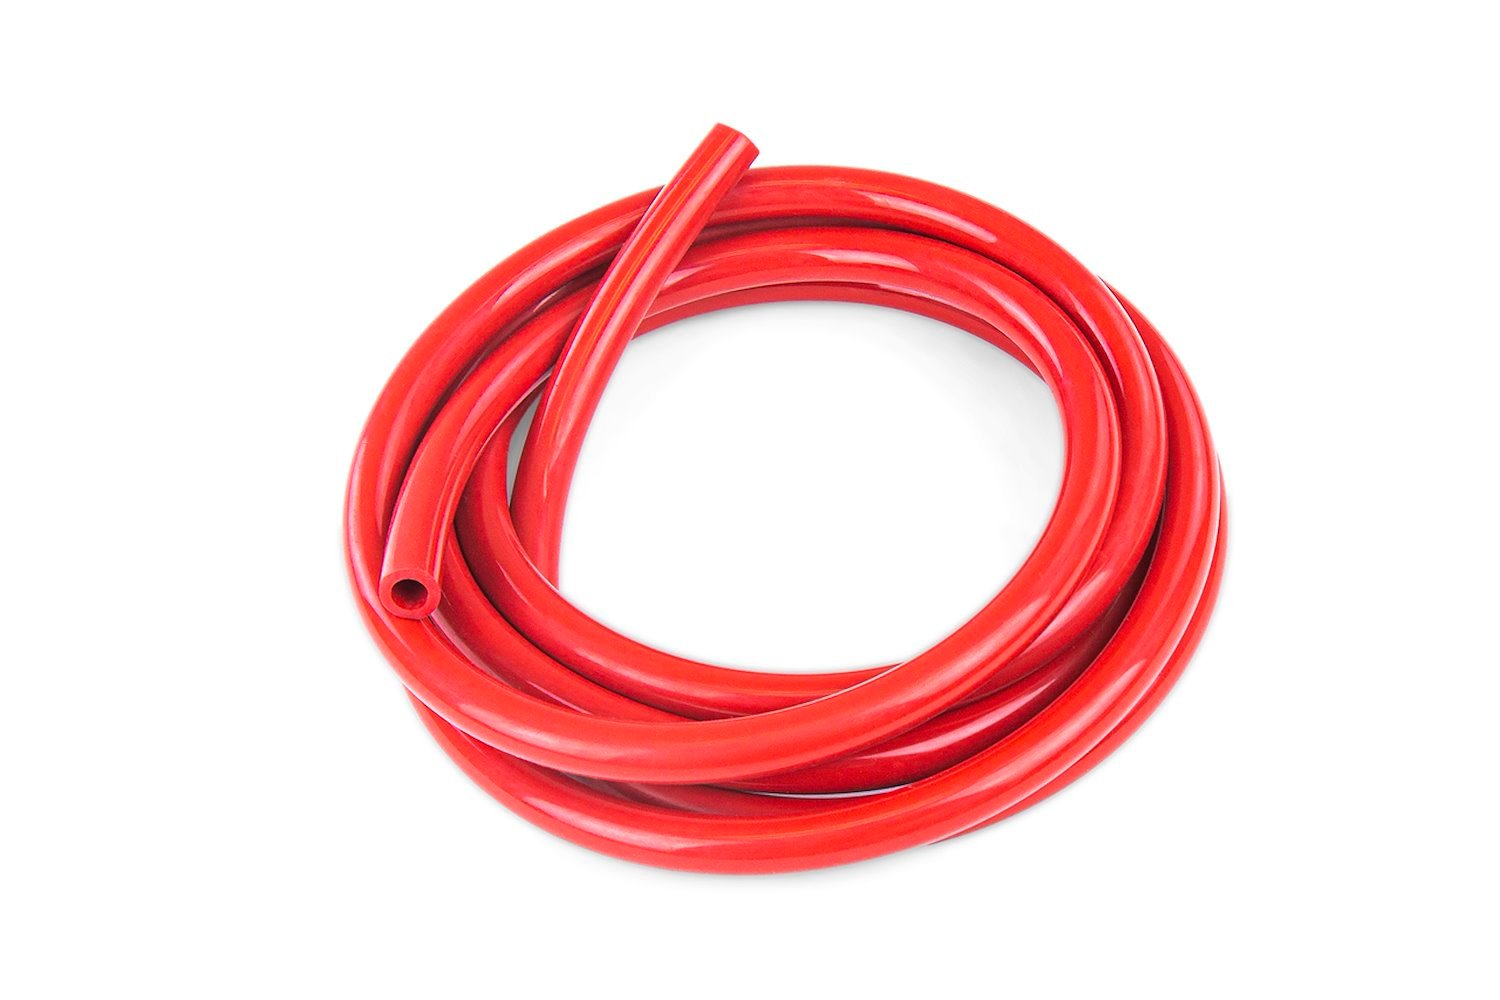 HTSVH5-REDx10 High-Temperature Silicone Vacuum Hose Tubing, 13/64 in. ID, 10 ft. Roll, Red